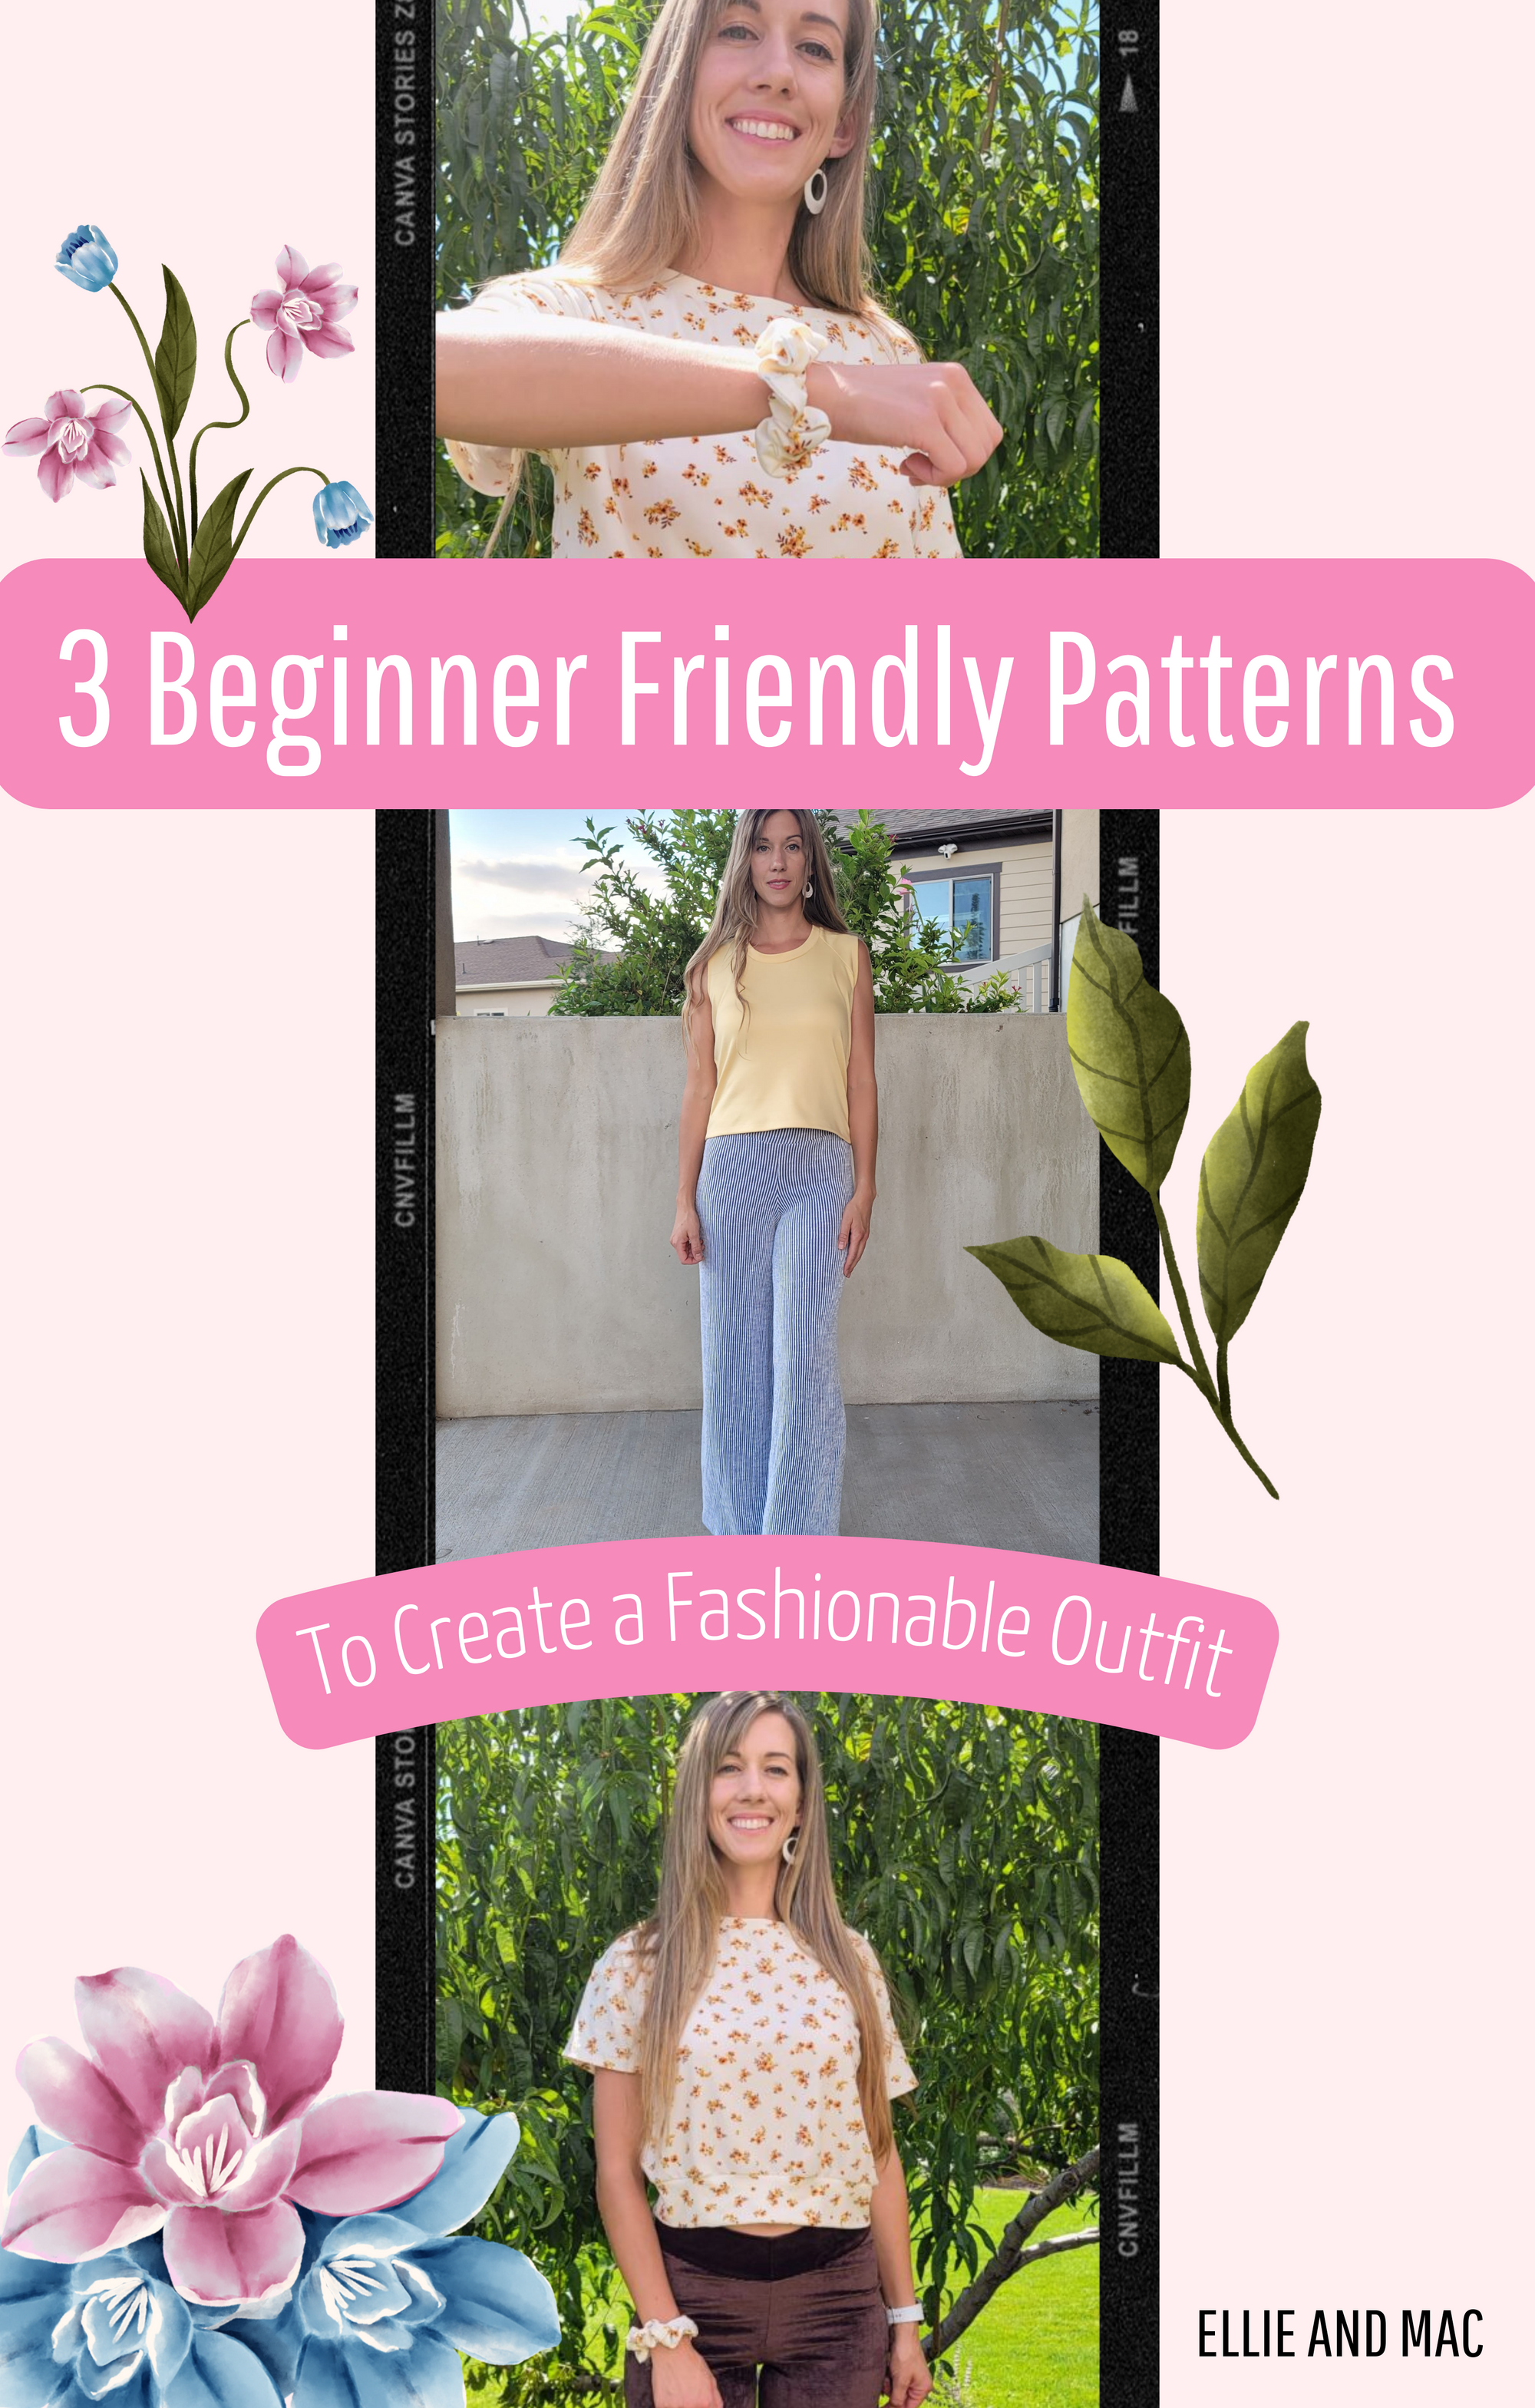 3 Beginner Friendly Patterns To Create a Fashionable Outfit